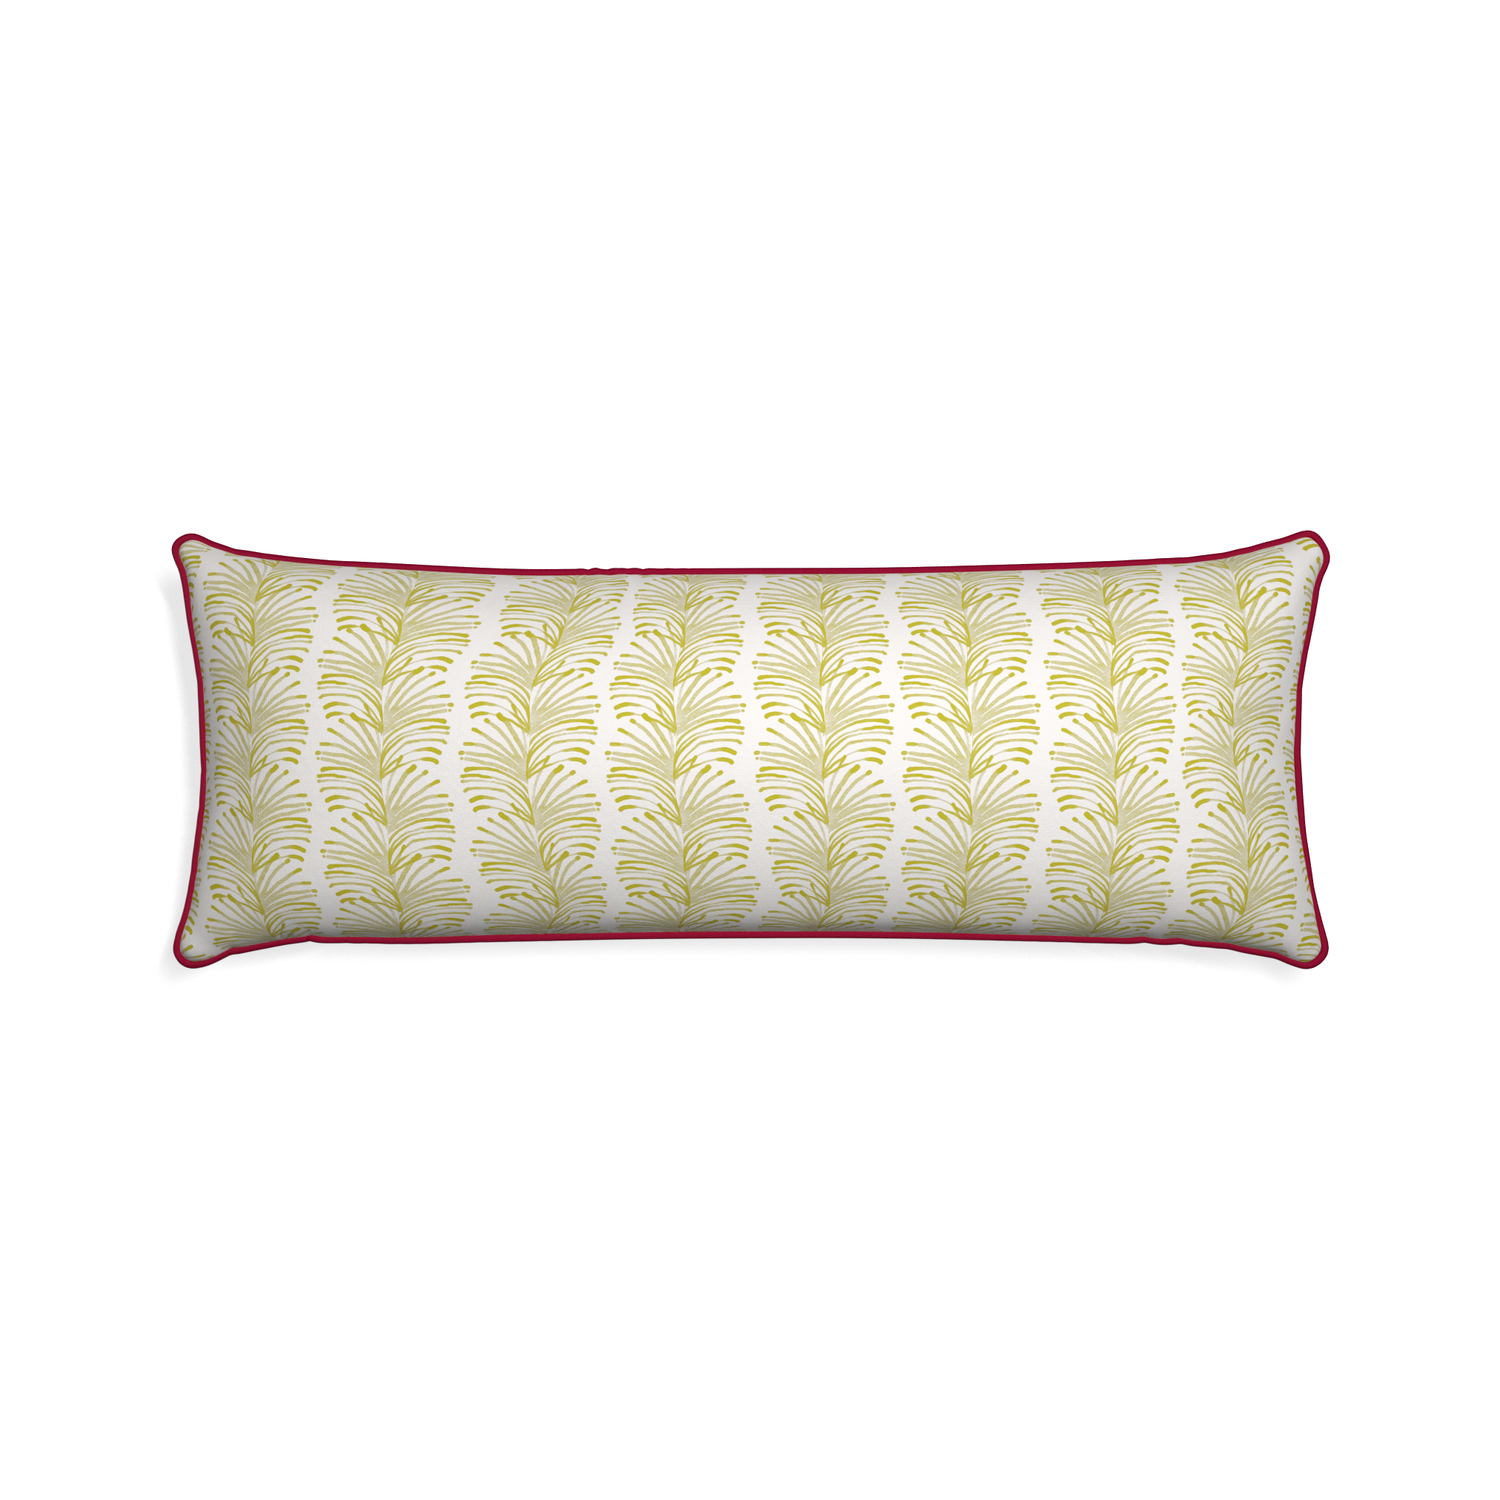 Xl-lumbar emma chartreuse custom yellow stripe chartreusepillow with raspberry piping on white background